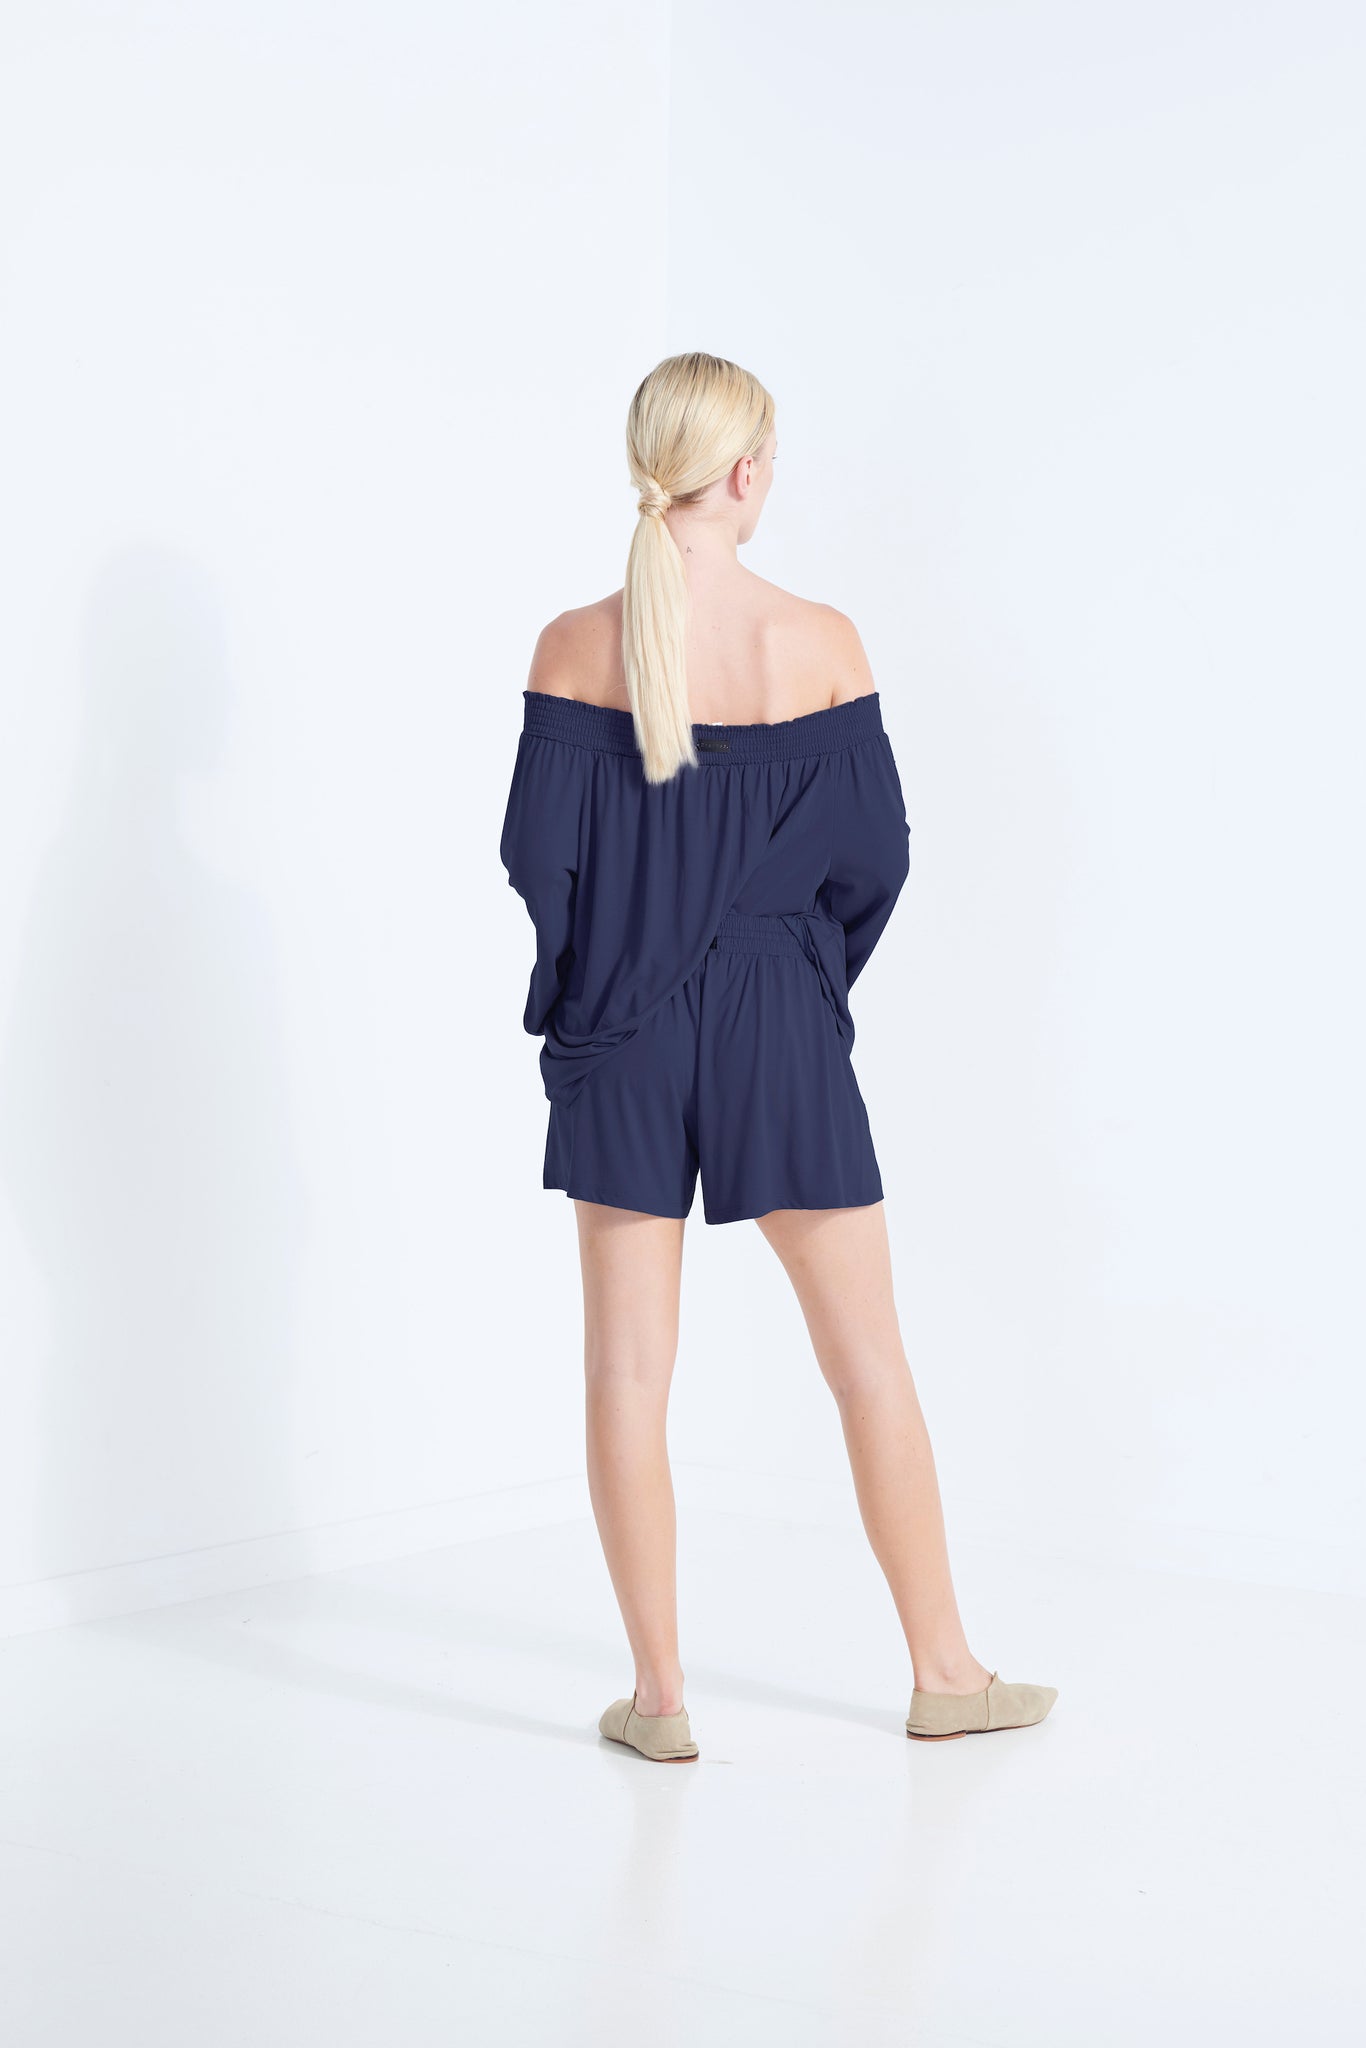 NAEVIA OFF SHOULDER TOP KNIT BEECHWOOD MODAL ELASTIC TOP WITH BELL SLEEVE AEGEAN WASHED NAVY BACK VIEW